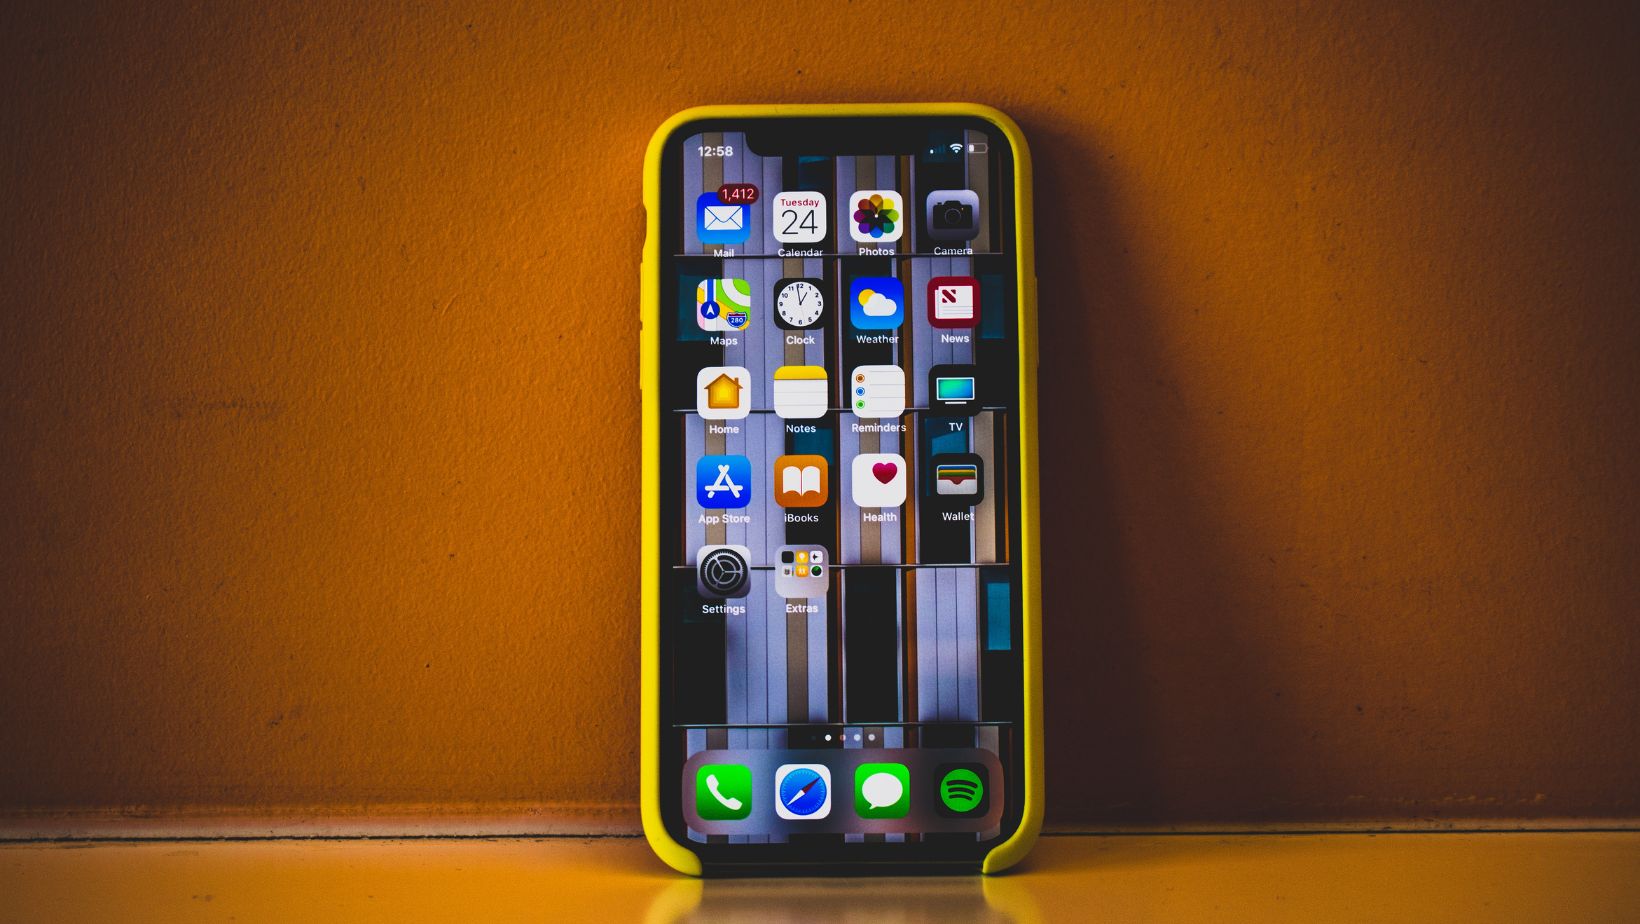 How To Restart Your Iphone Xr Without a Screen